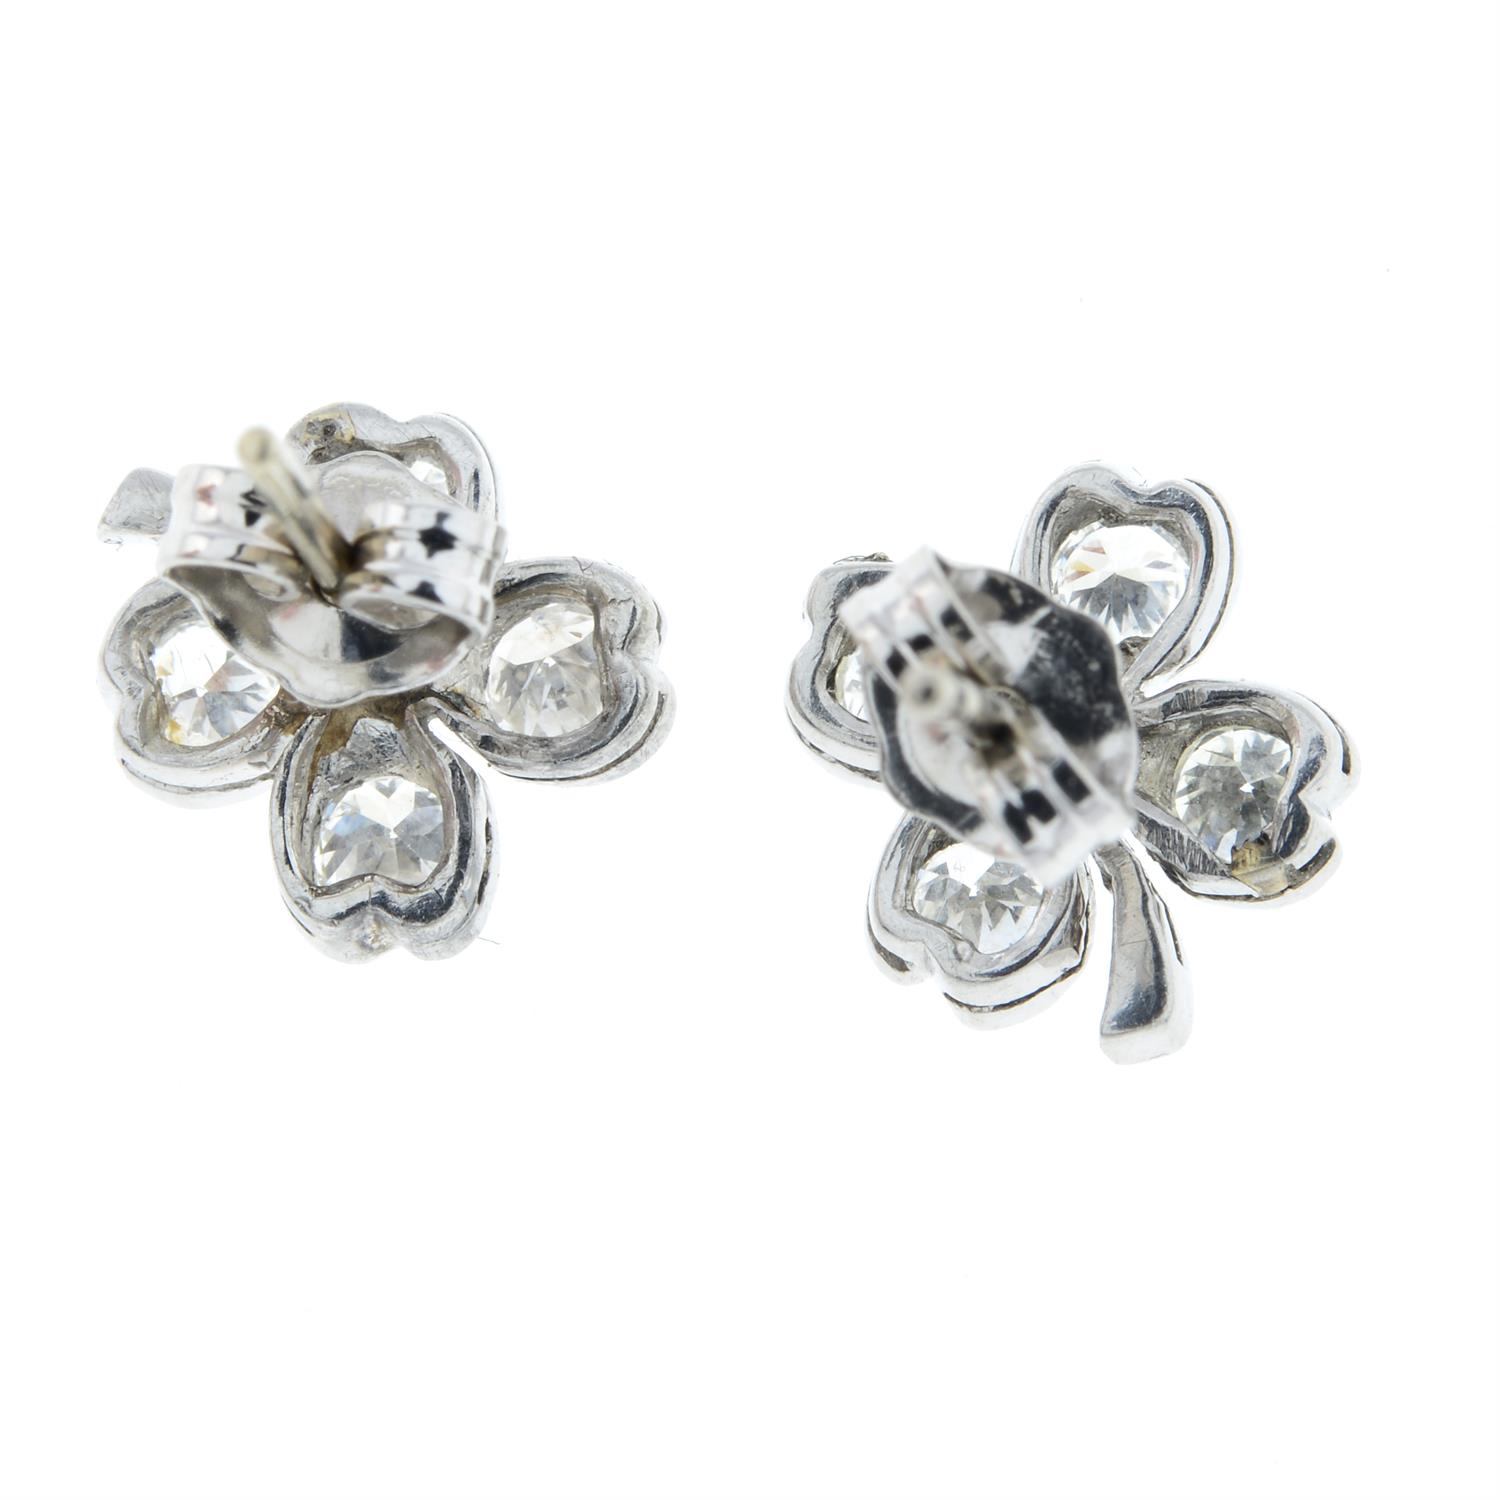 A pair of diamond four-leaf clover earrings. - Image 2 of 2